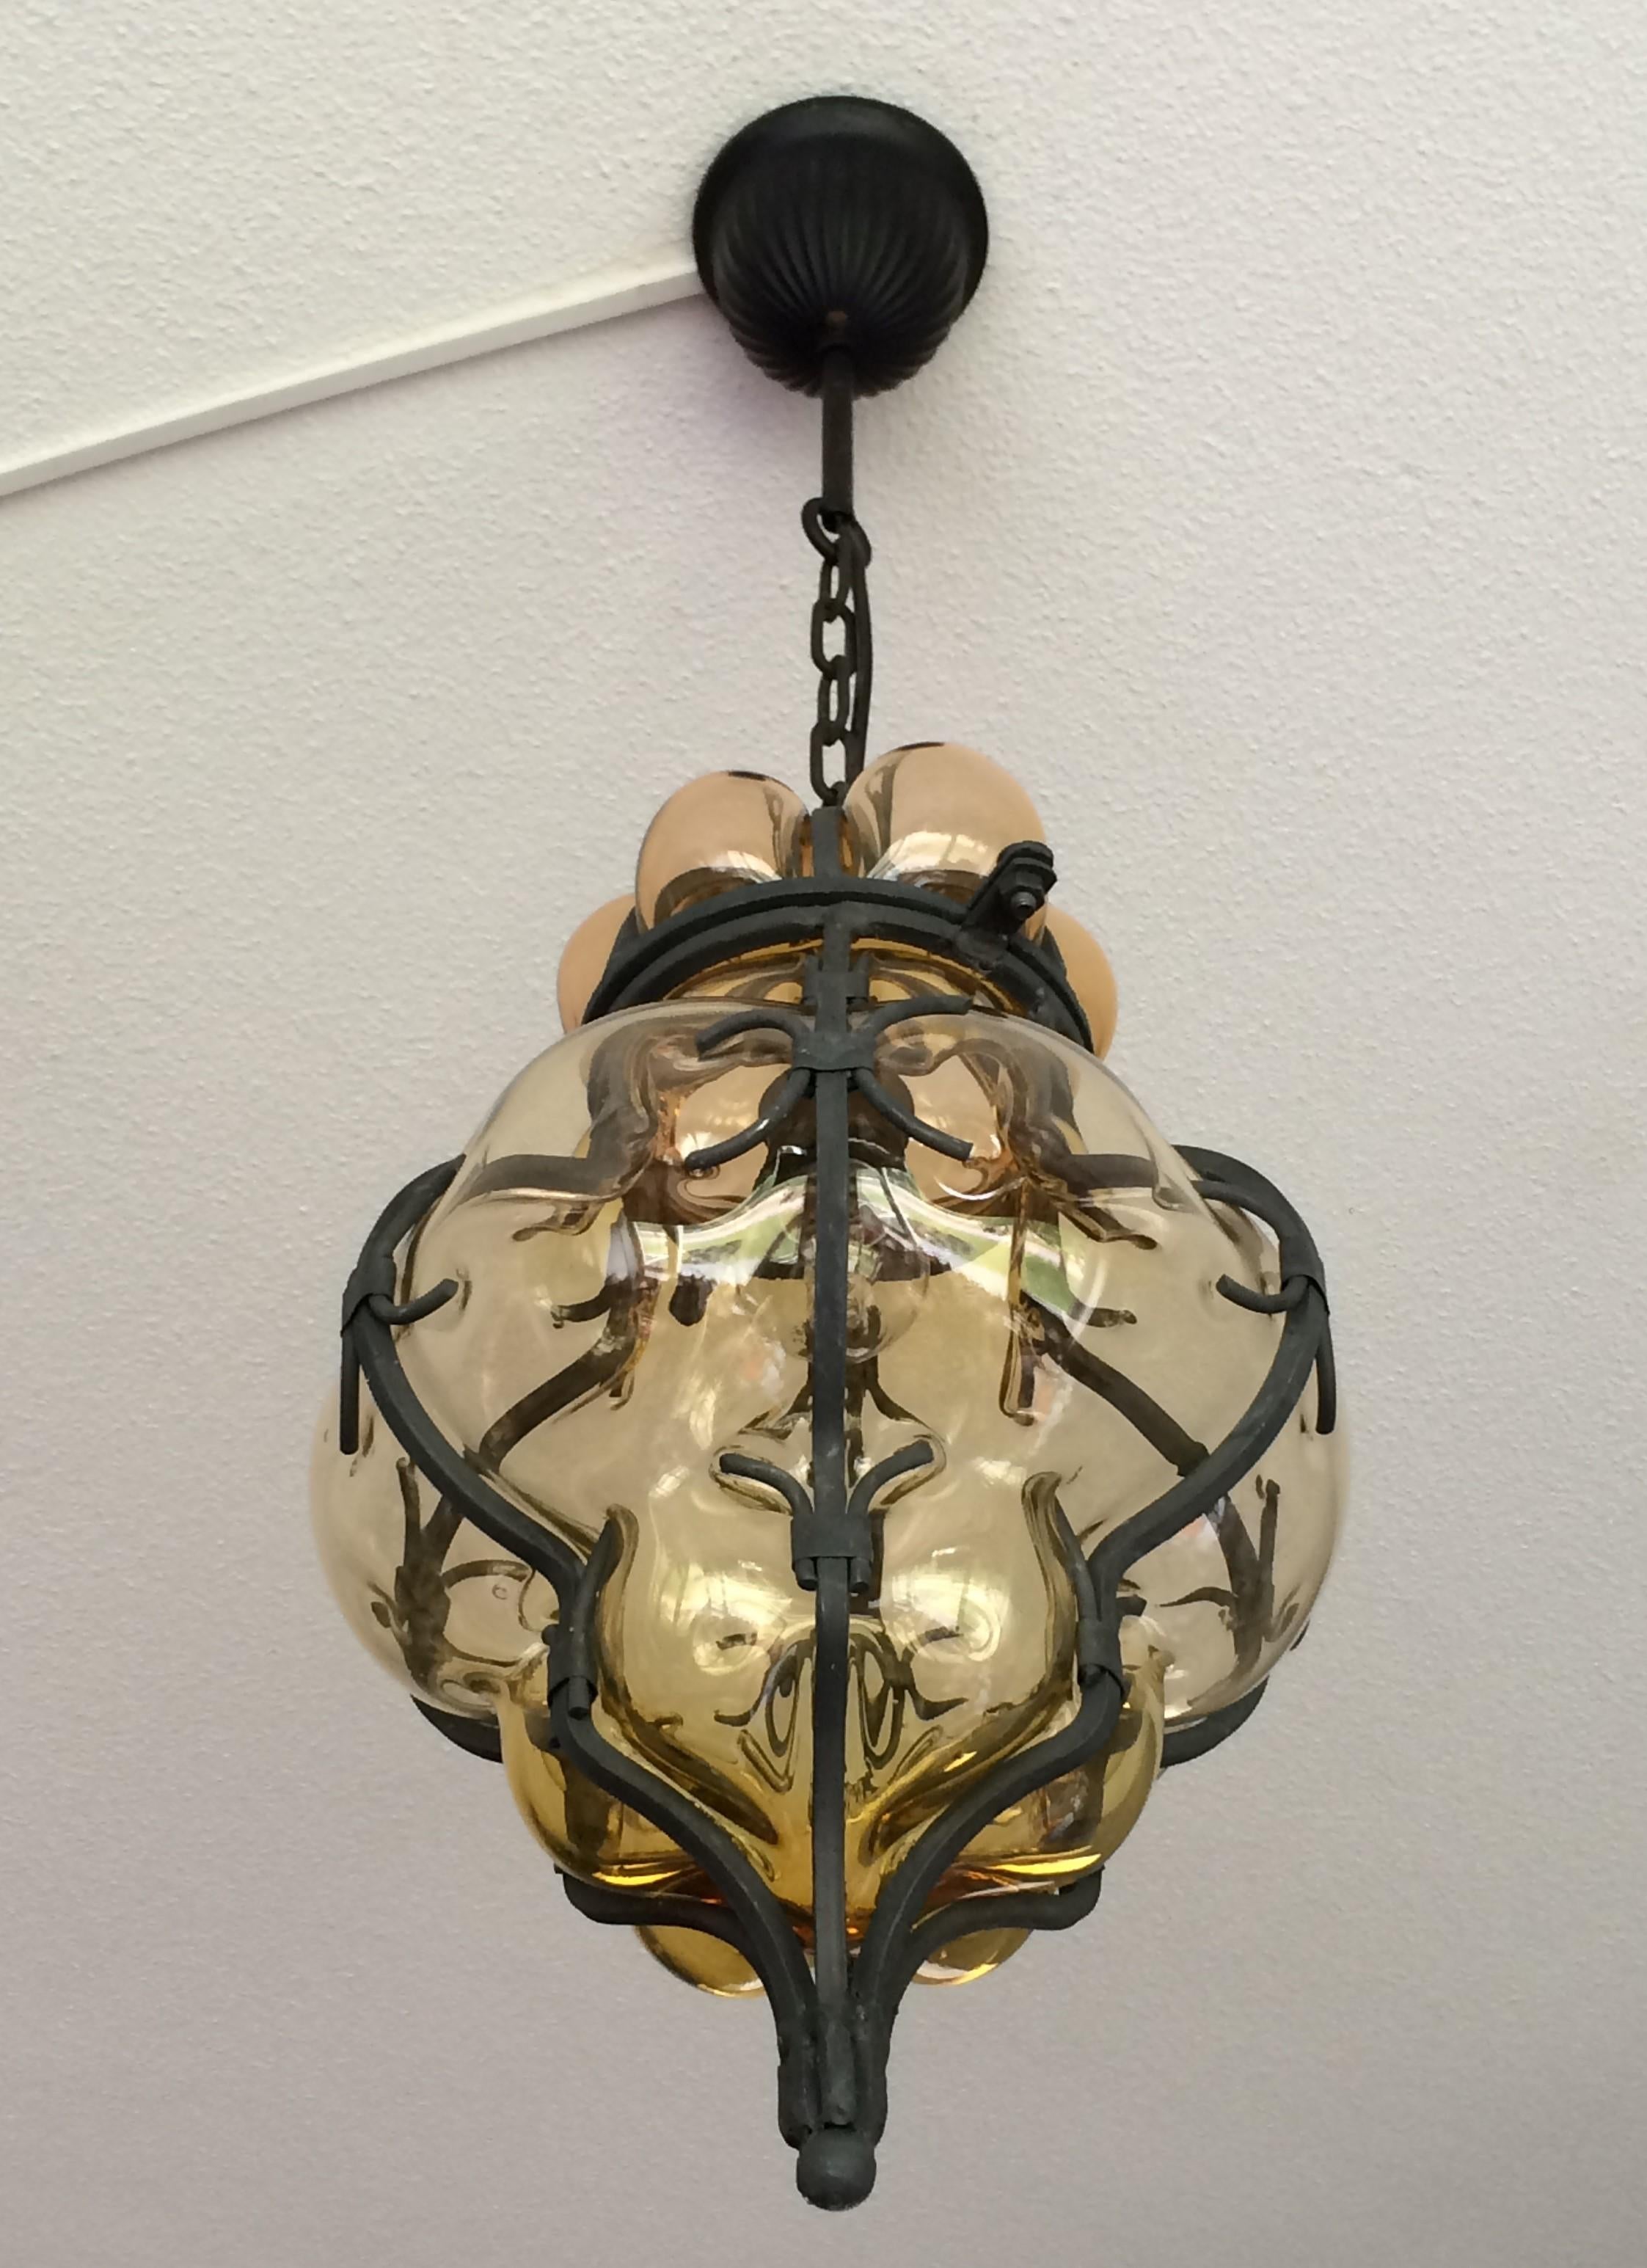 These handcrafted and stylish pendants are in near-mint condition.

This pair of single light, Italian pendants is very beautiful, both in shape and in color. The stunning amber glass is mouth-blown into hand forged, wrought iron frames and the